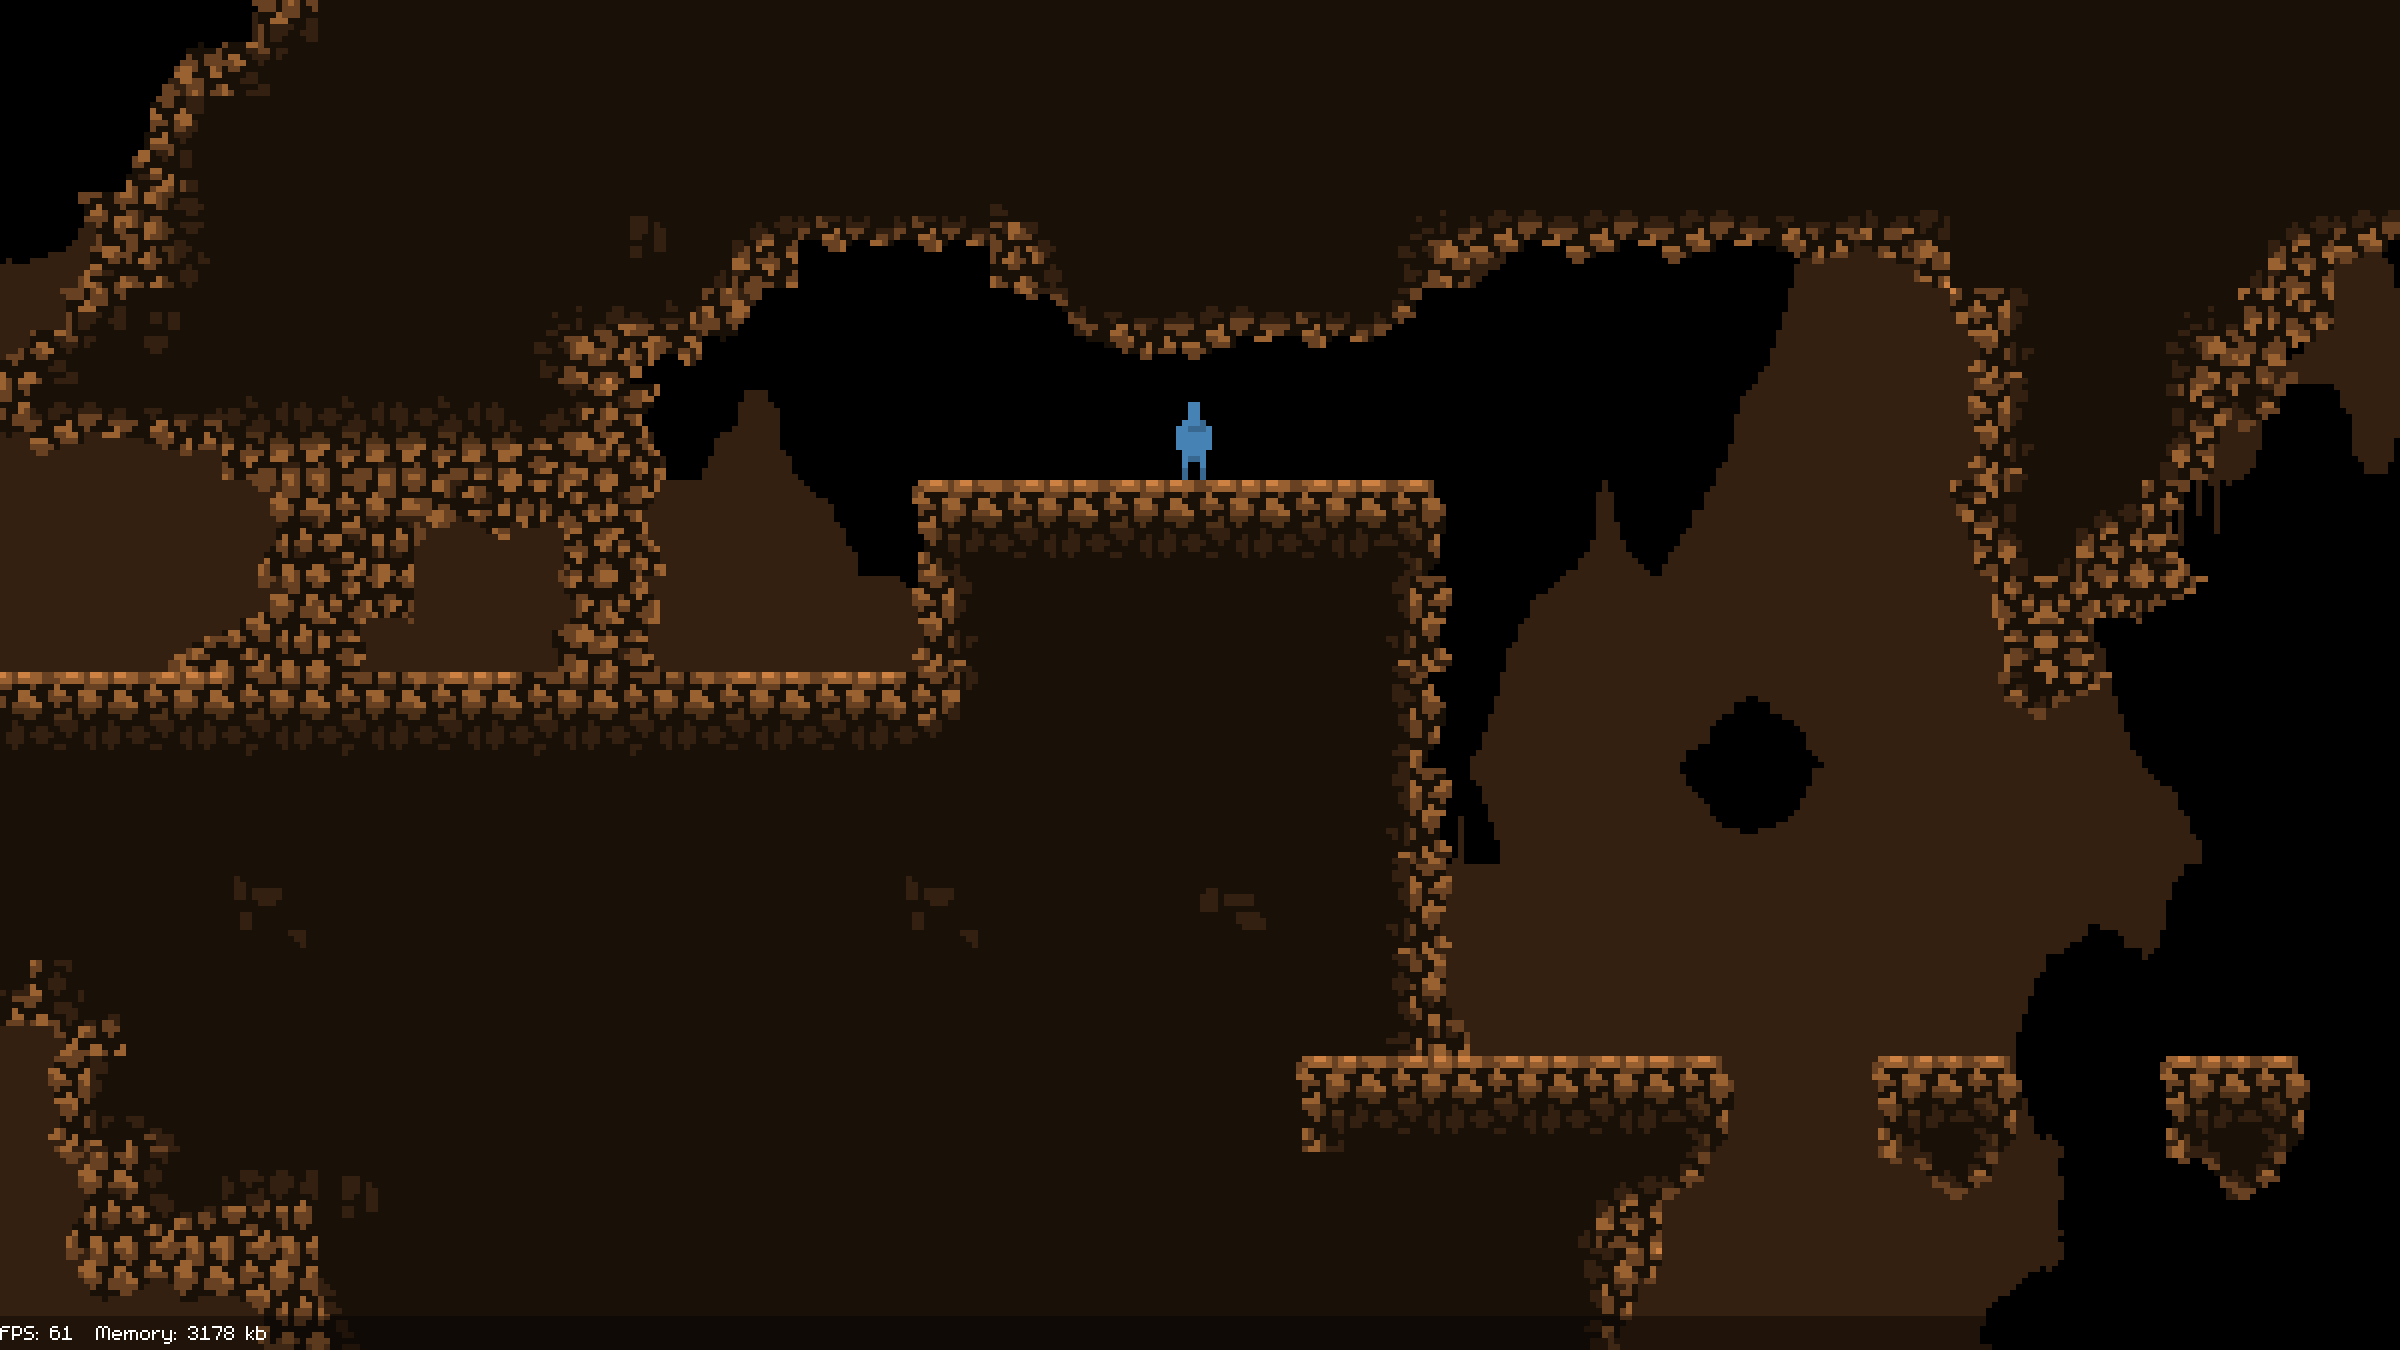 2d pixel art of a blue figure standing on a rocky outcropping inside of a cave system.